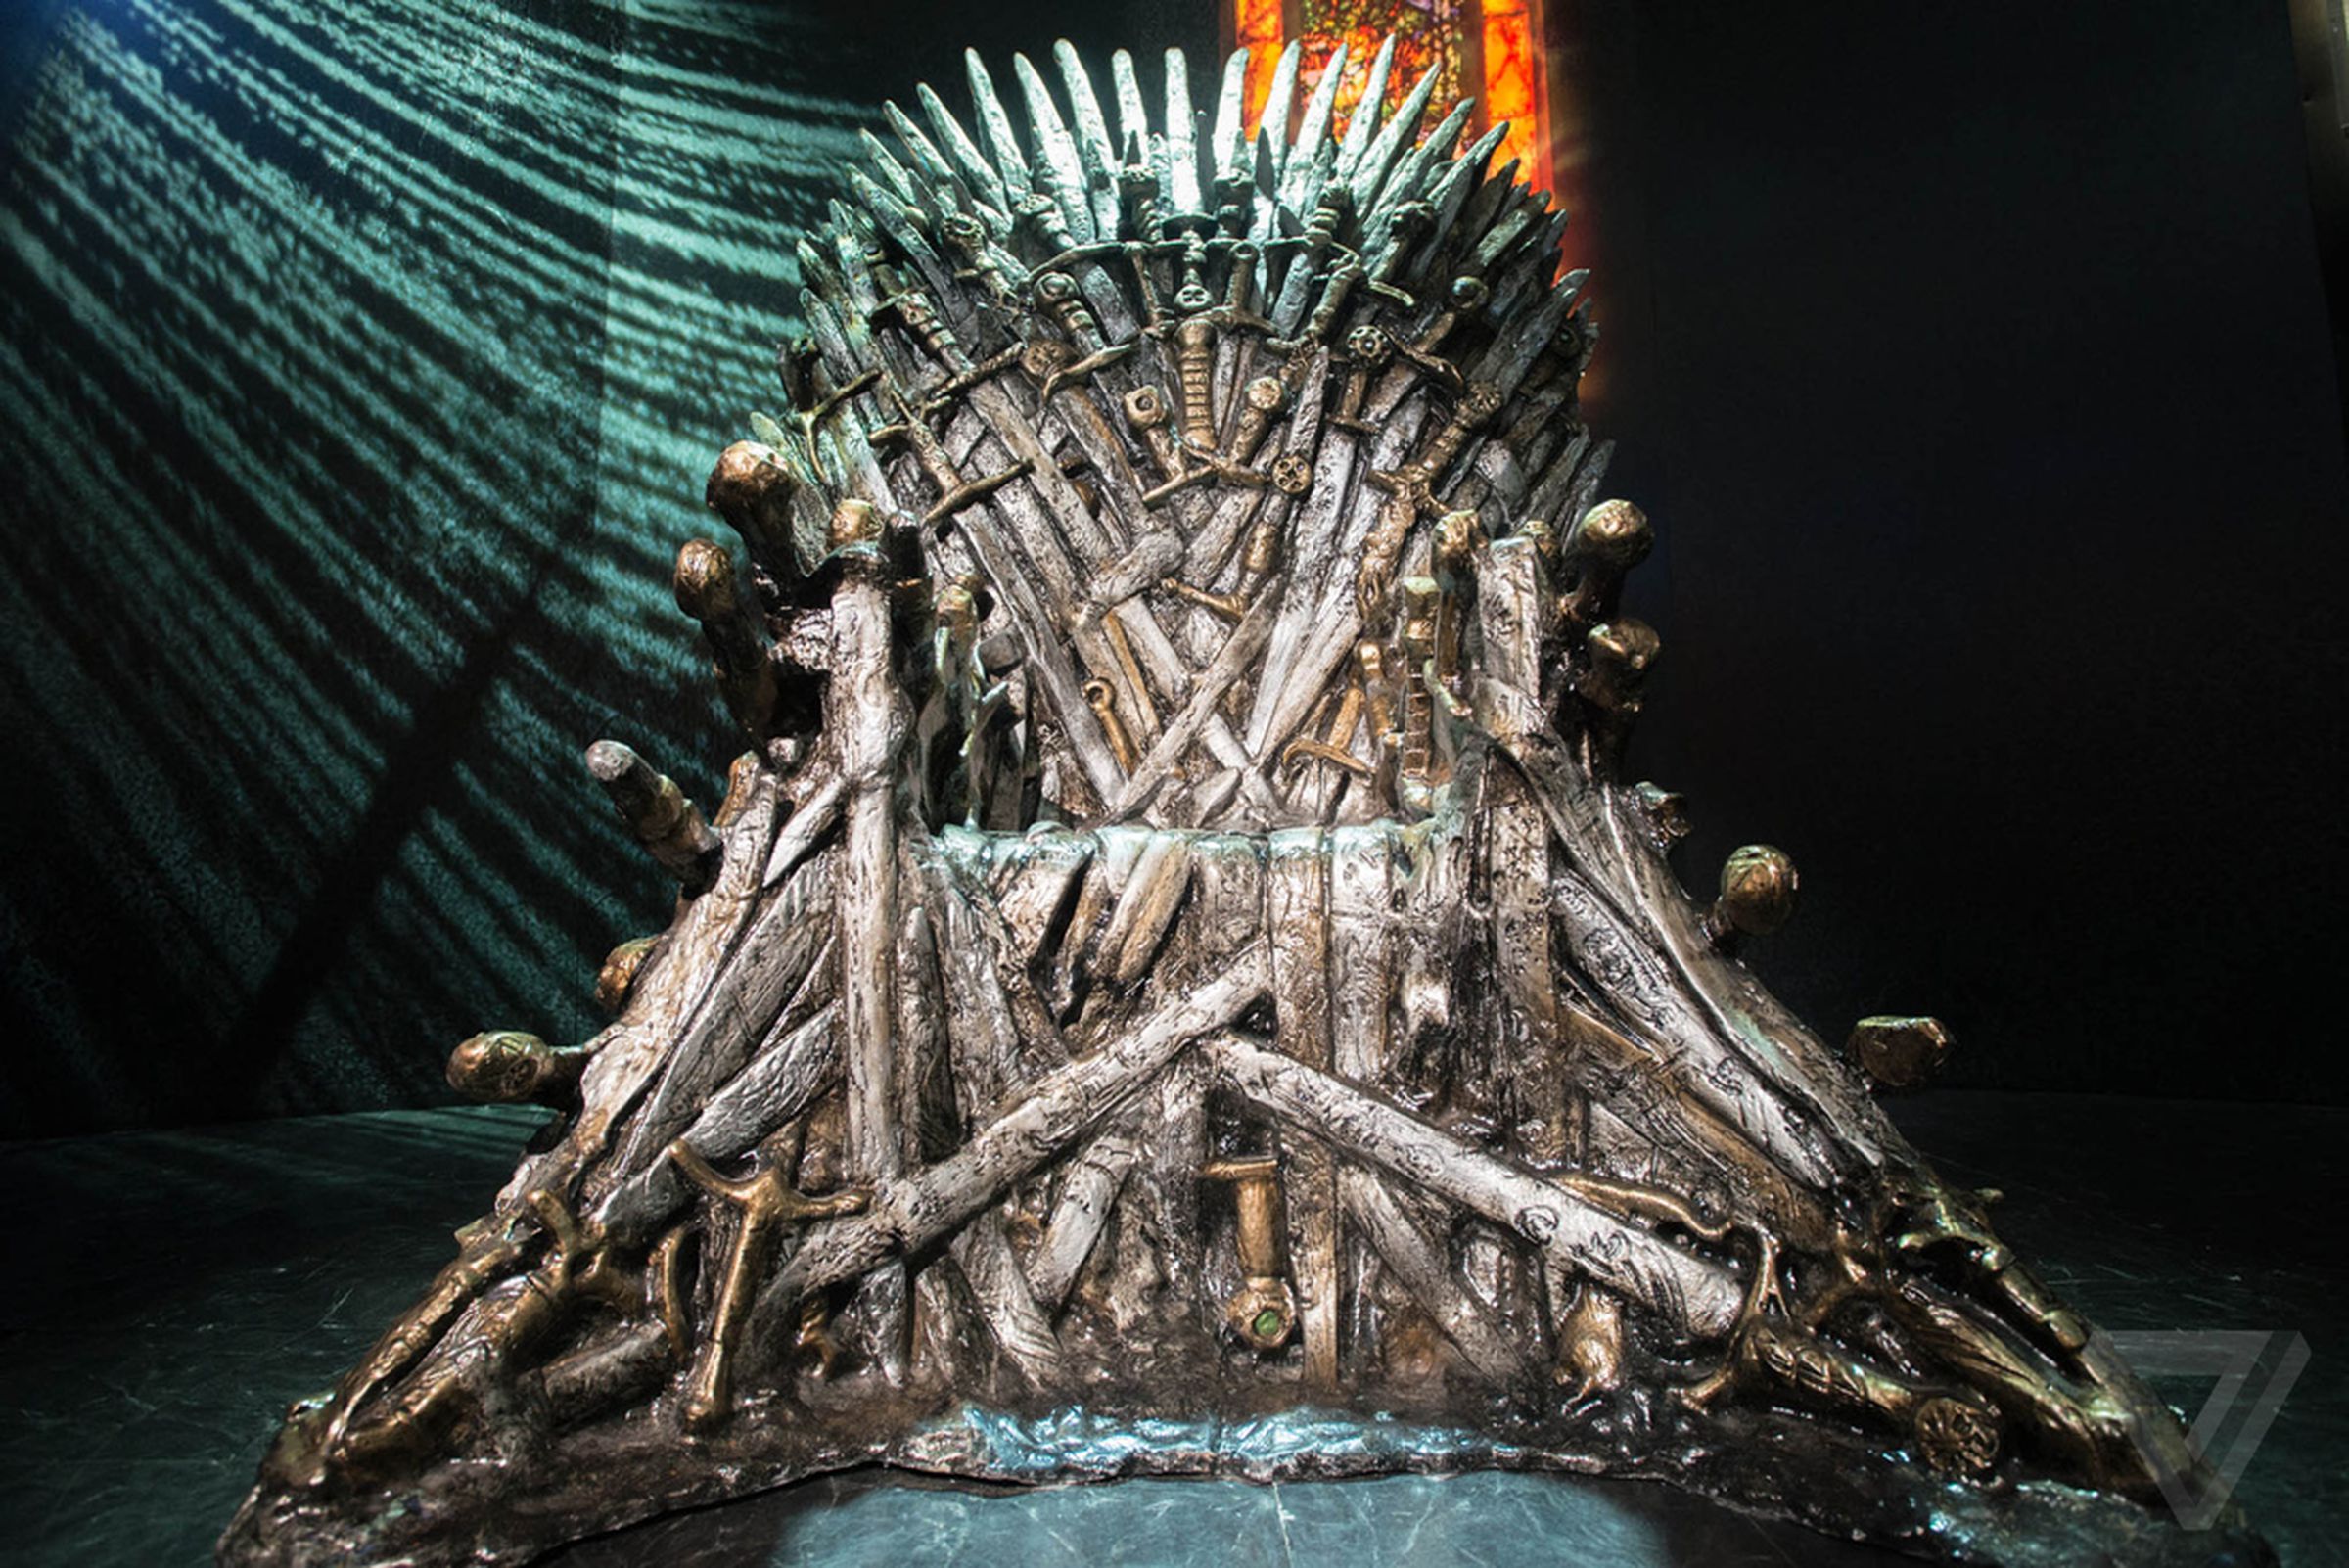 'Game of Thrones: The Exhibition' in pictures